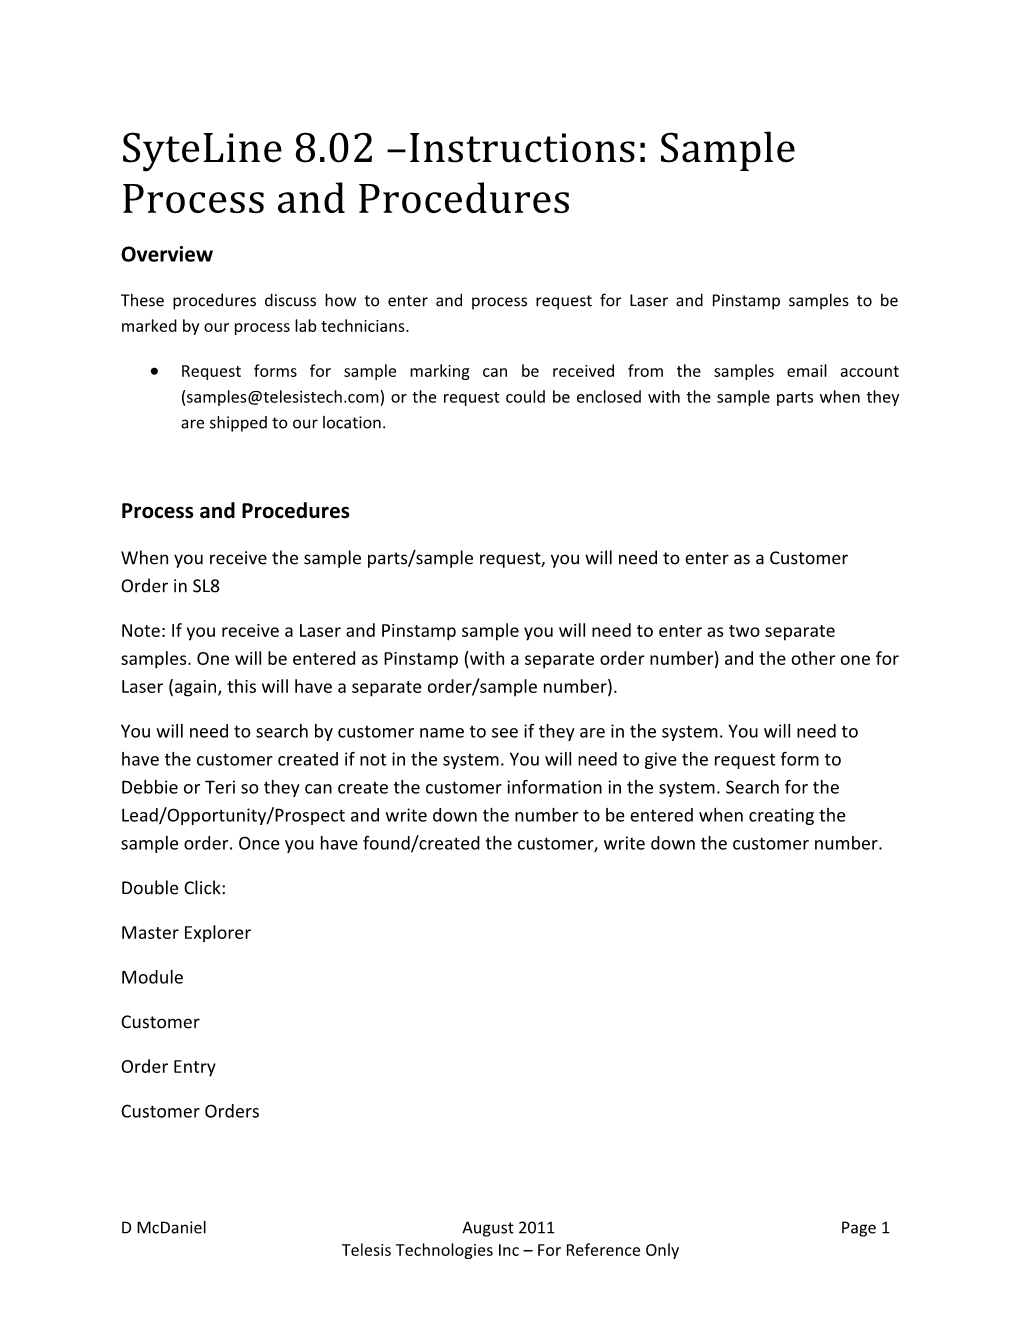 Syteline 8.02 Instructions: Sample Process and Procedures